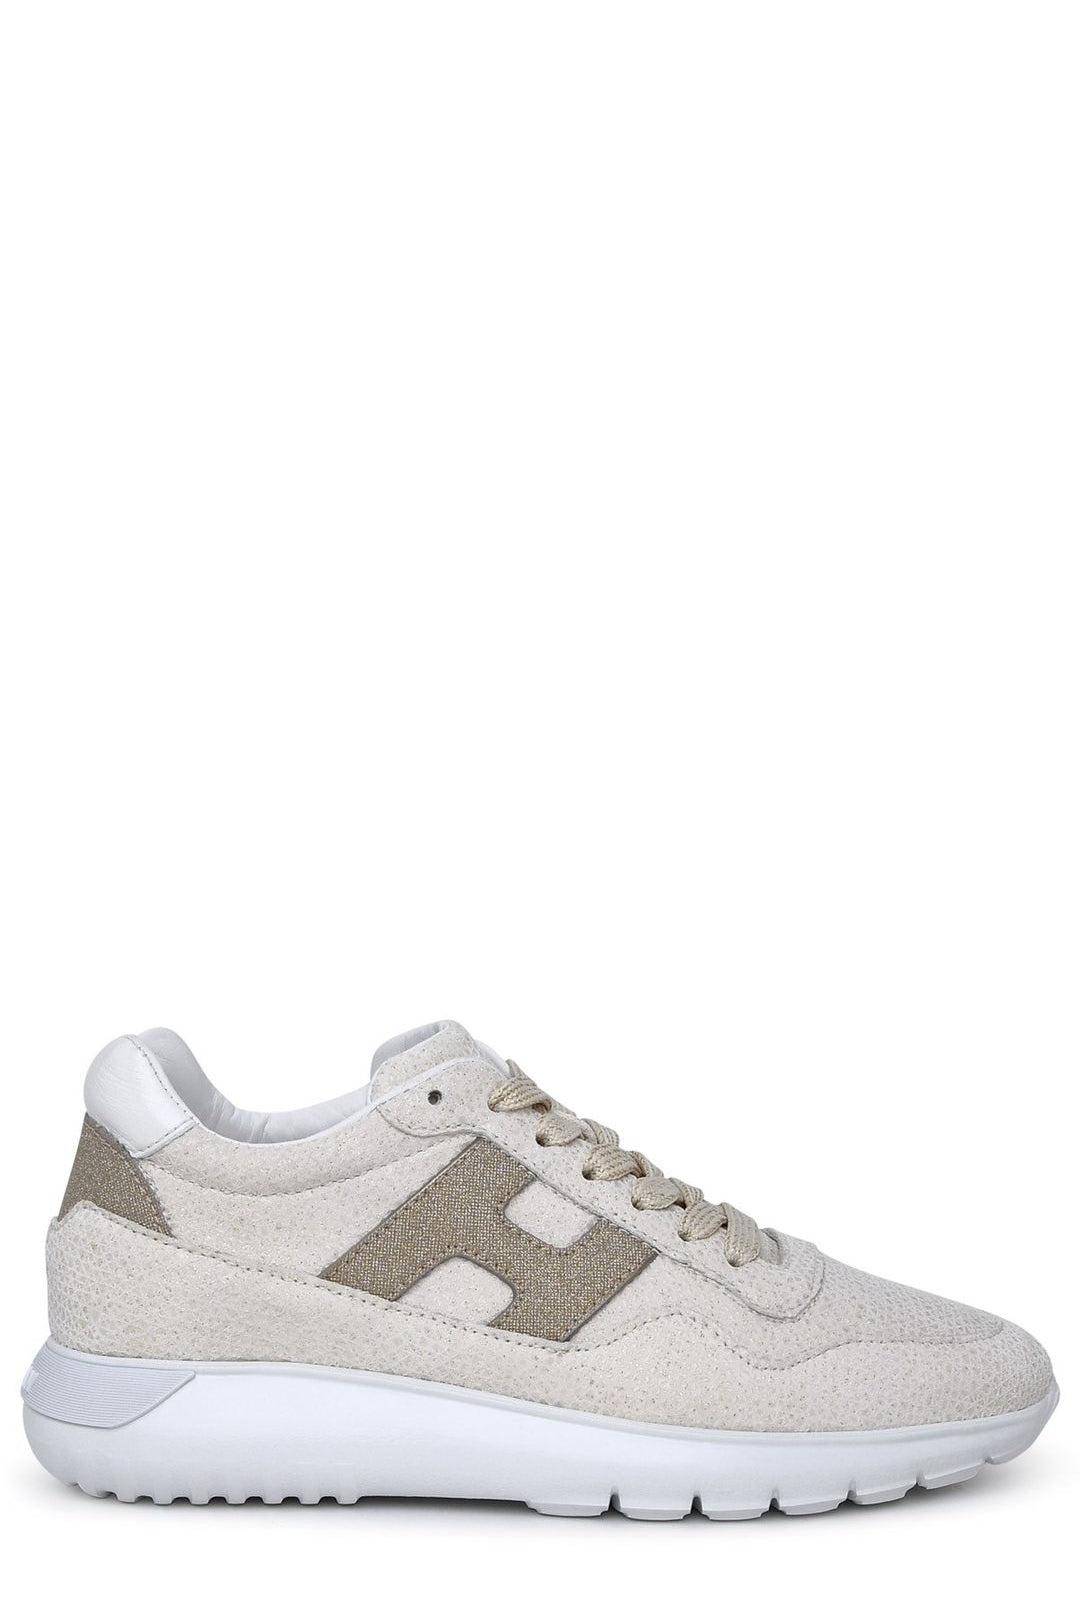 Hogan Logo Patch Lace-up Sneakers